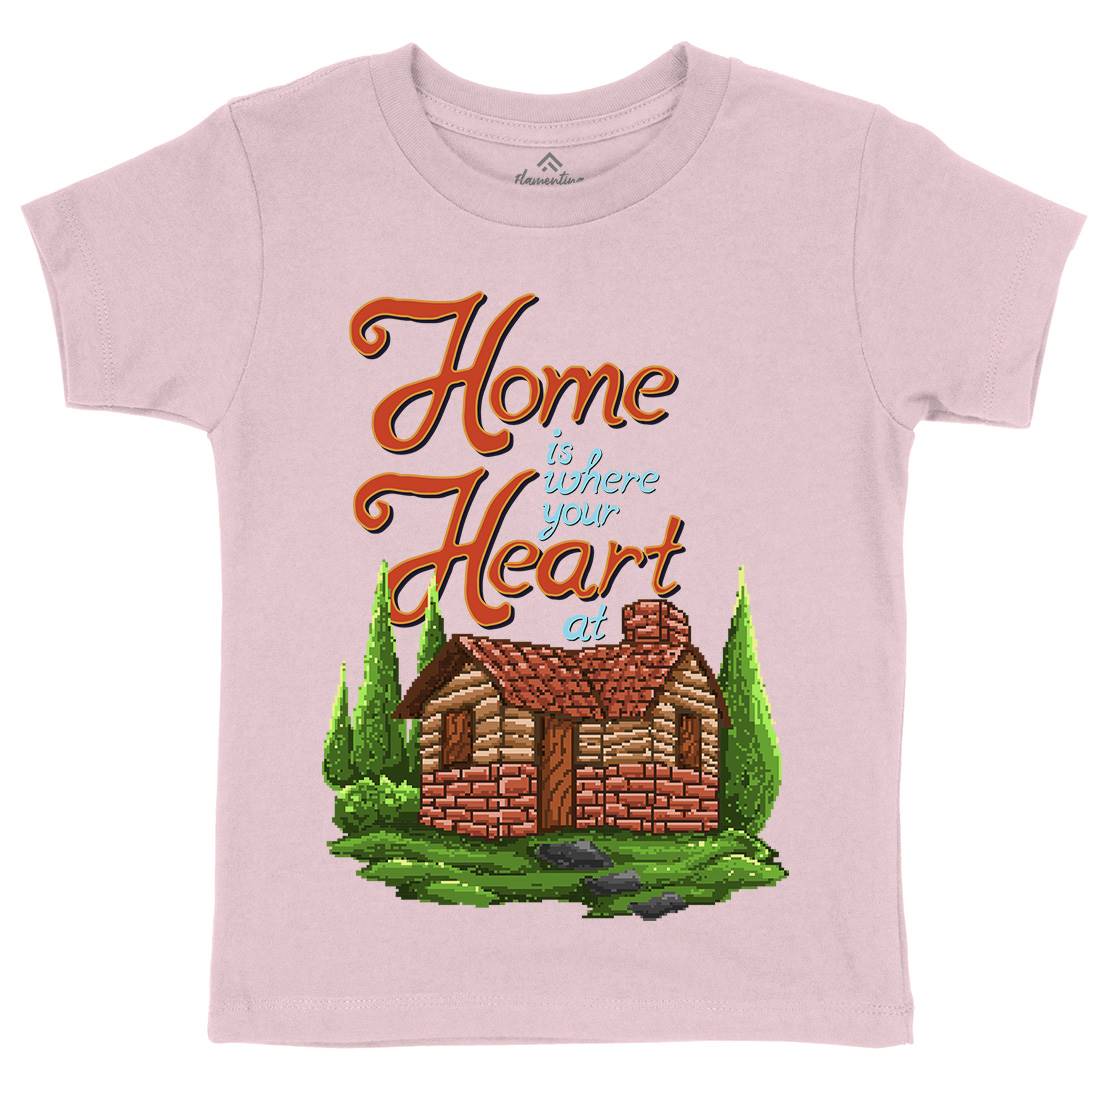 House Is Where Your Heart At Kids Organic Crew Neck T-Shirt Nature B912